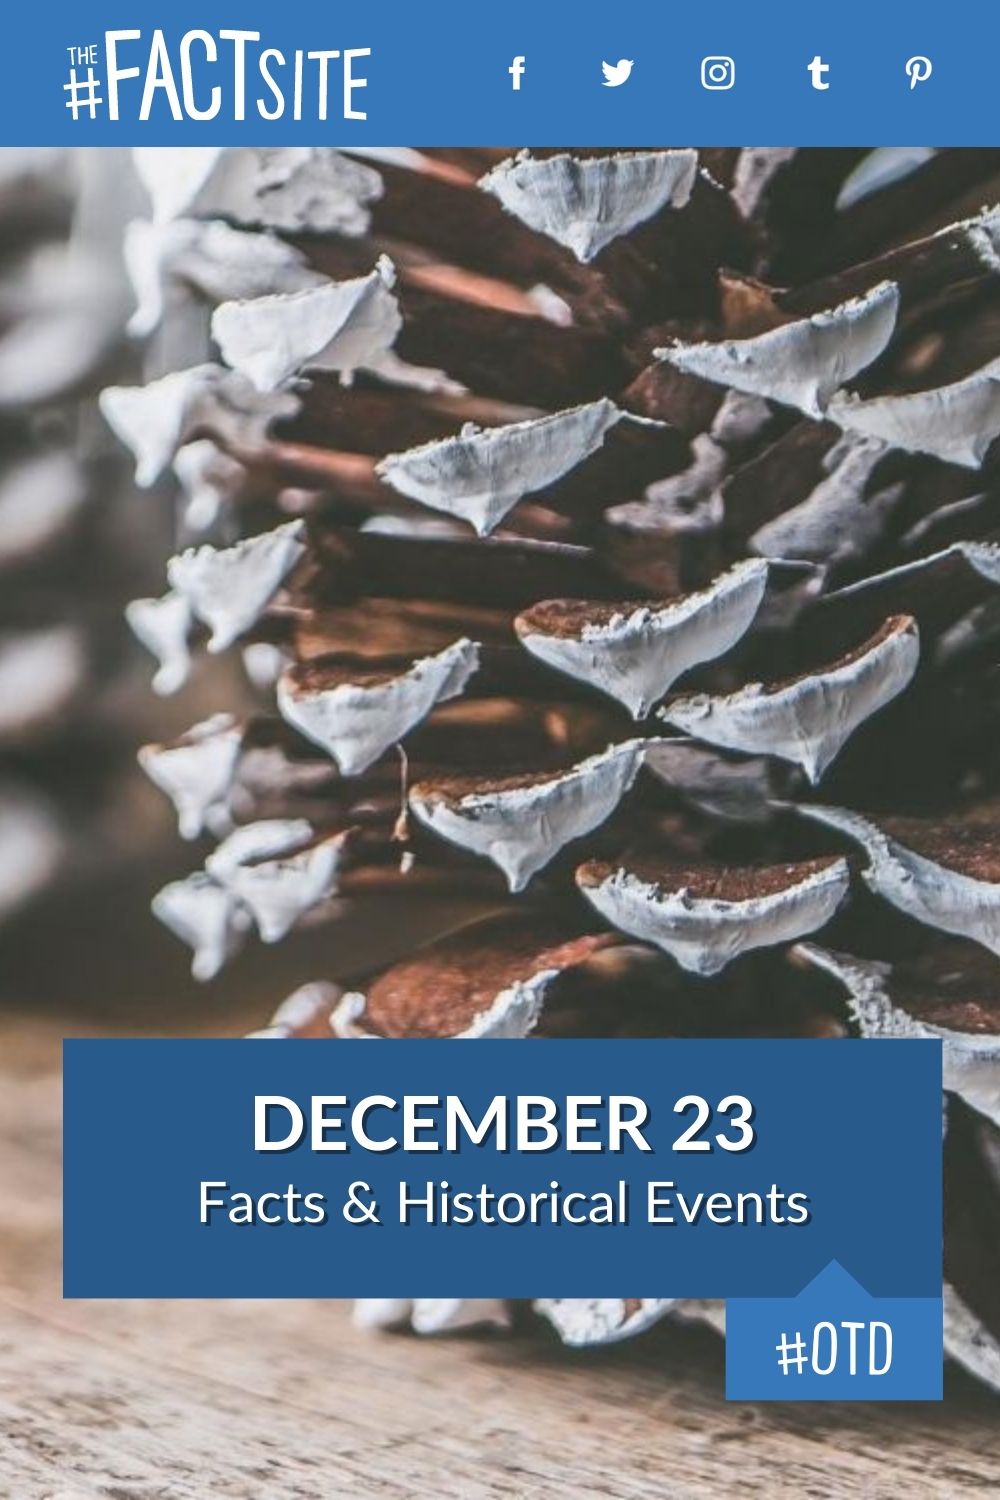 December 23: Facts & Historical Events On This Day